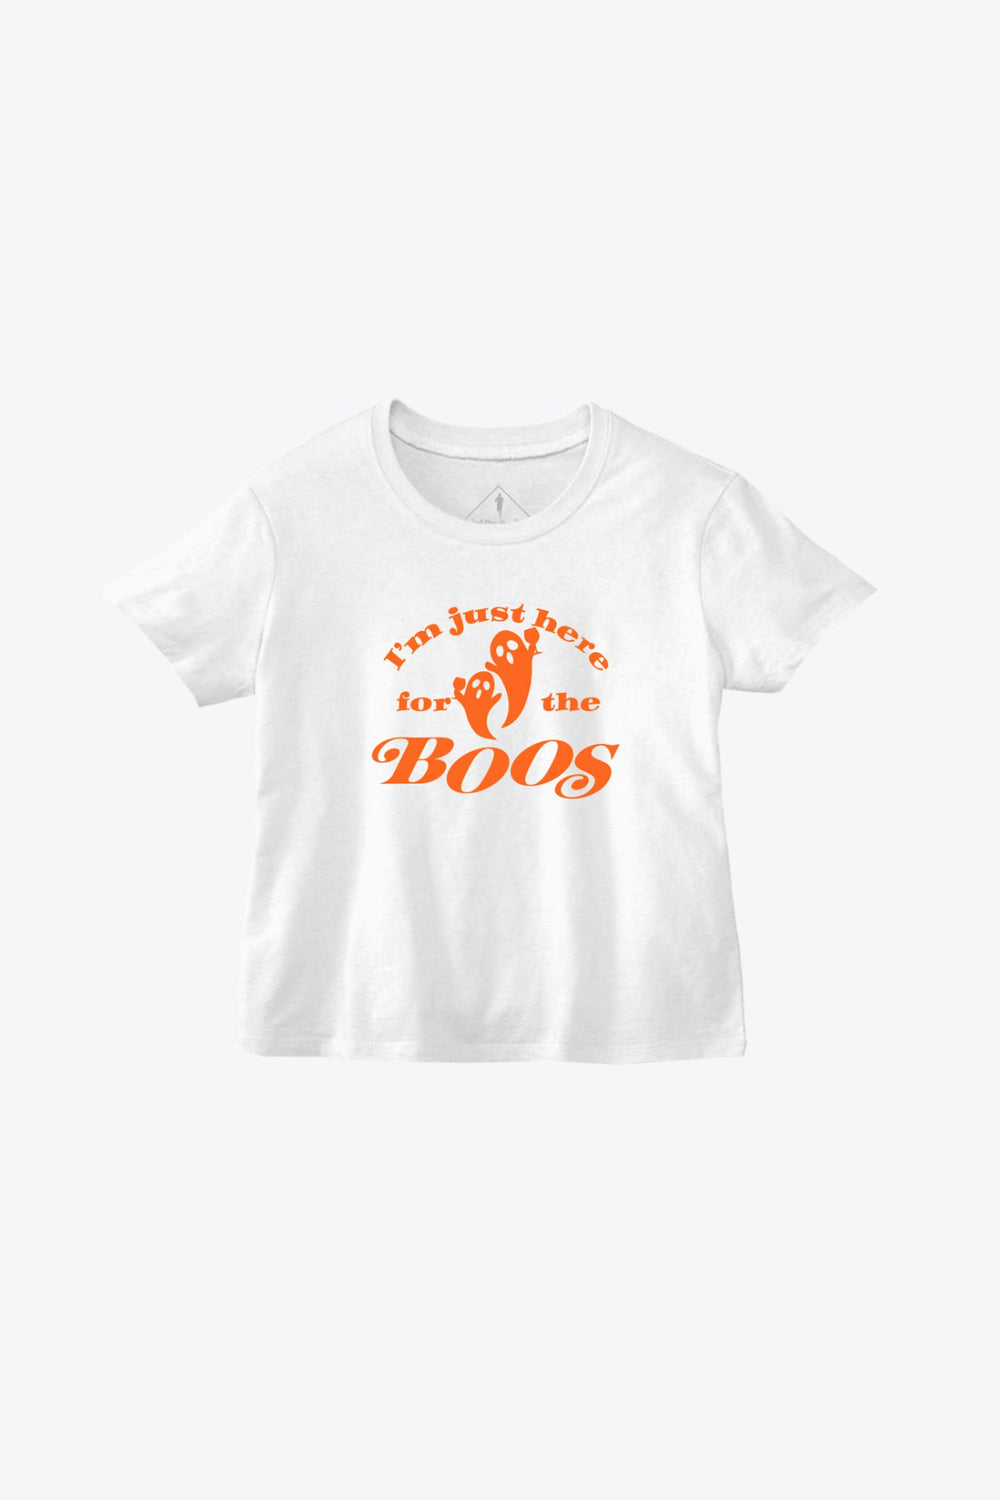 Here for the Boos T-Shirt - Sarah Marie Design Studio